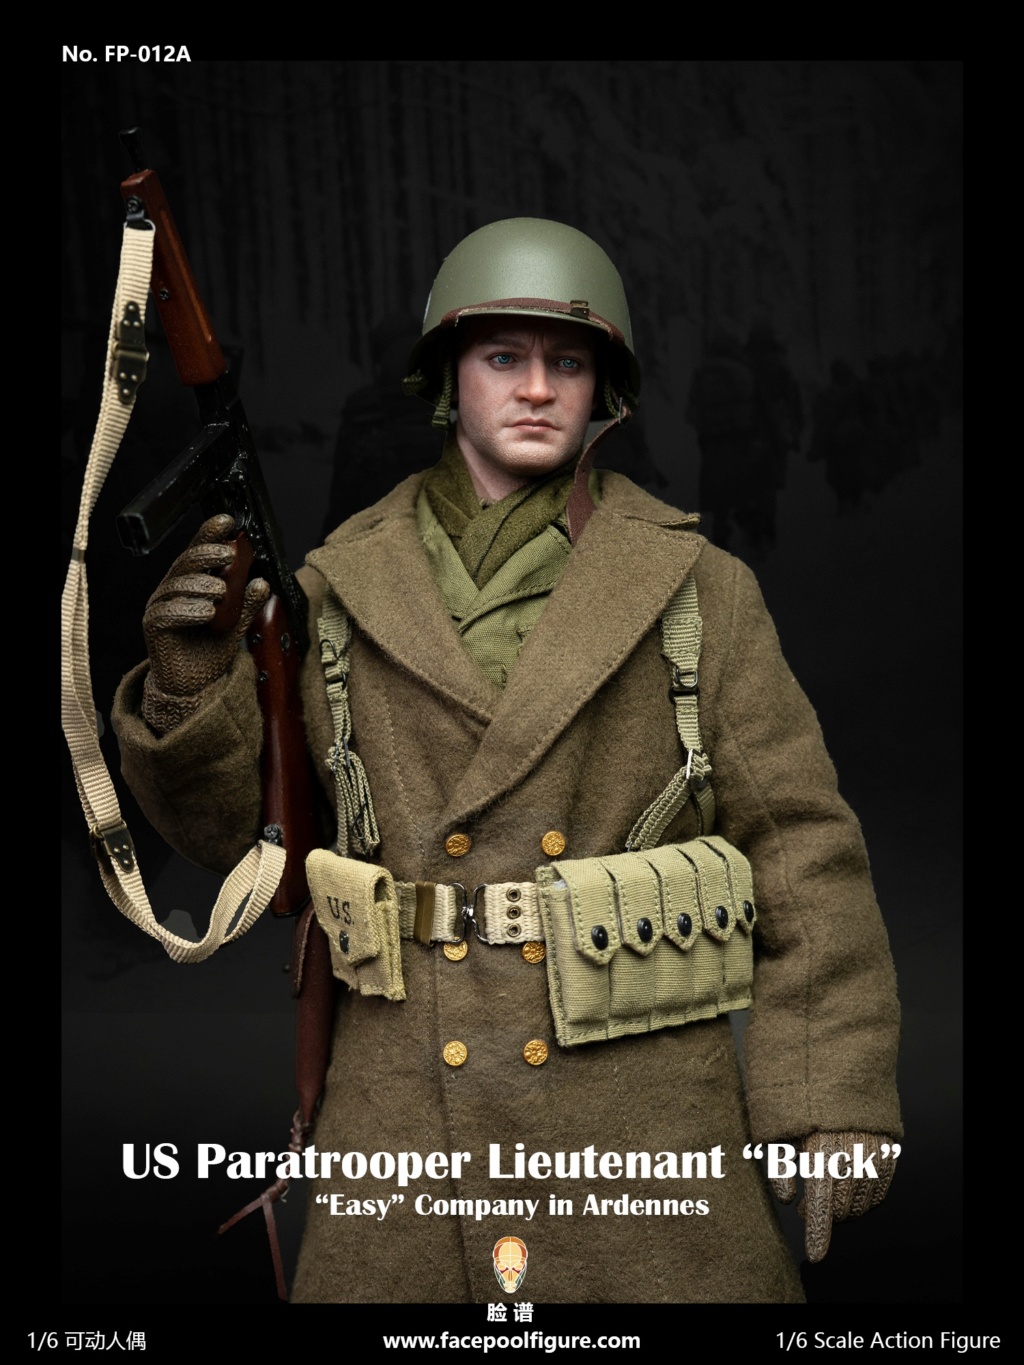 cableTV-based - NEW PRODUCT: Facepool: 1/6 Scale US Paratrooper Lieutenant “Buck” (FP012A & B) (2 versions) 10140010